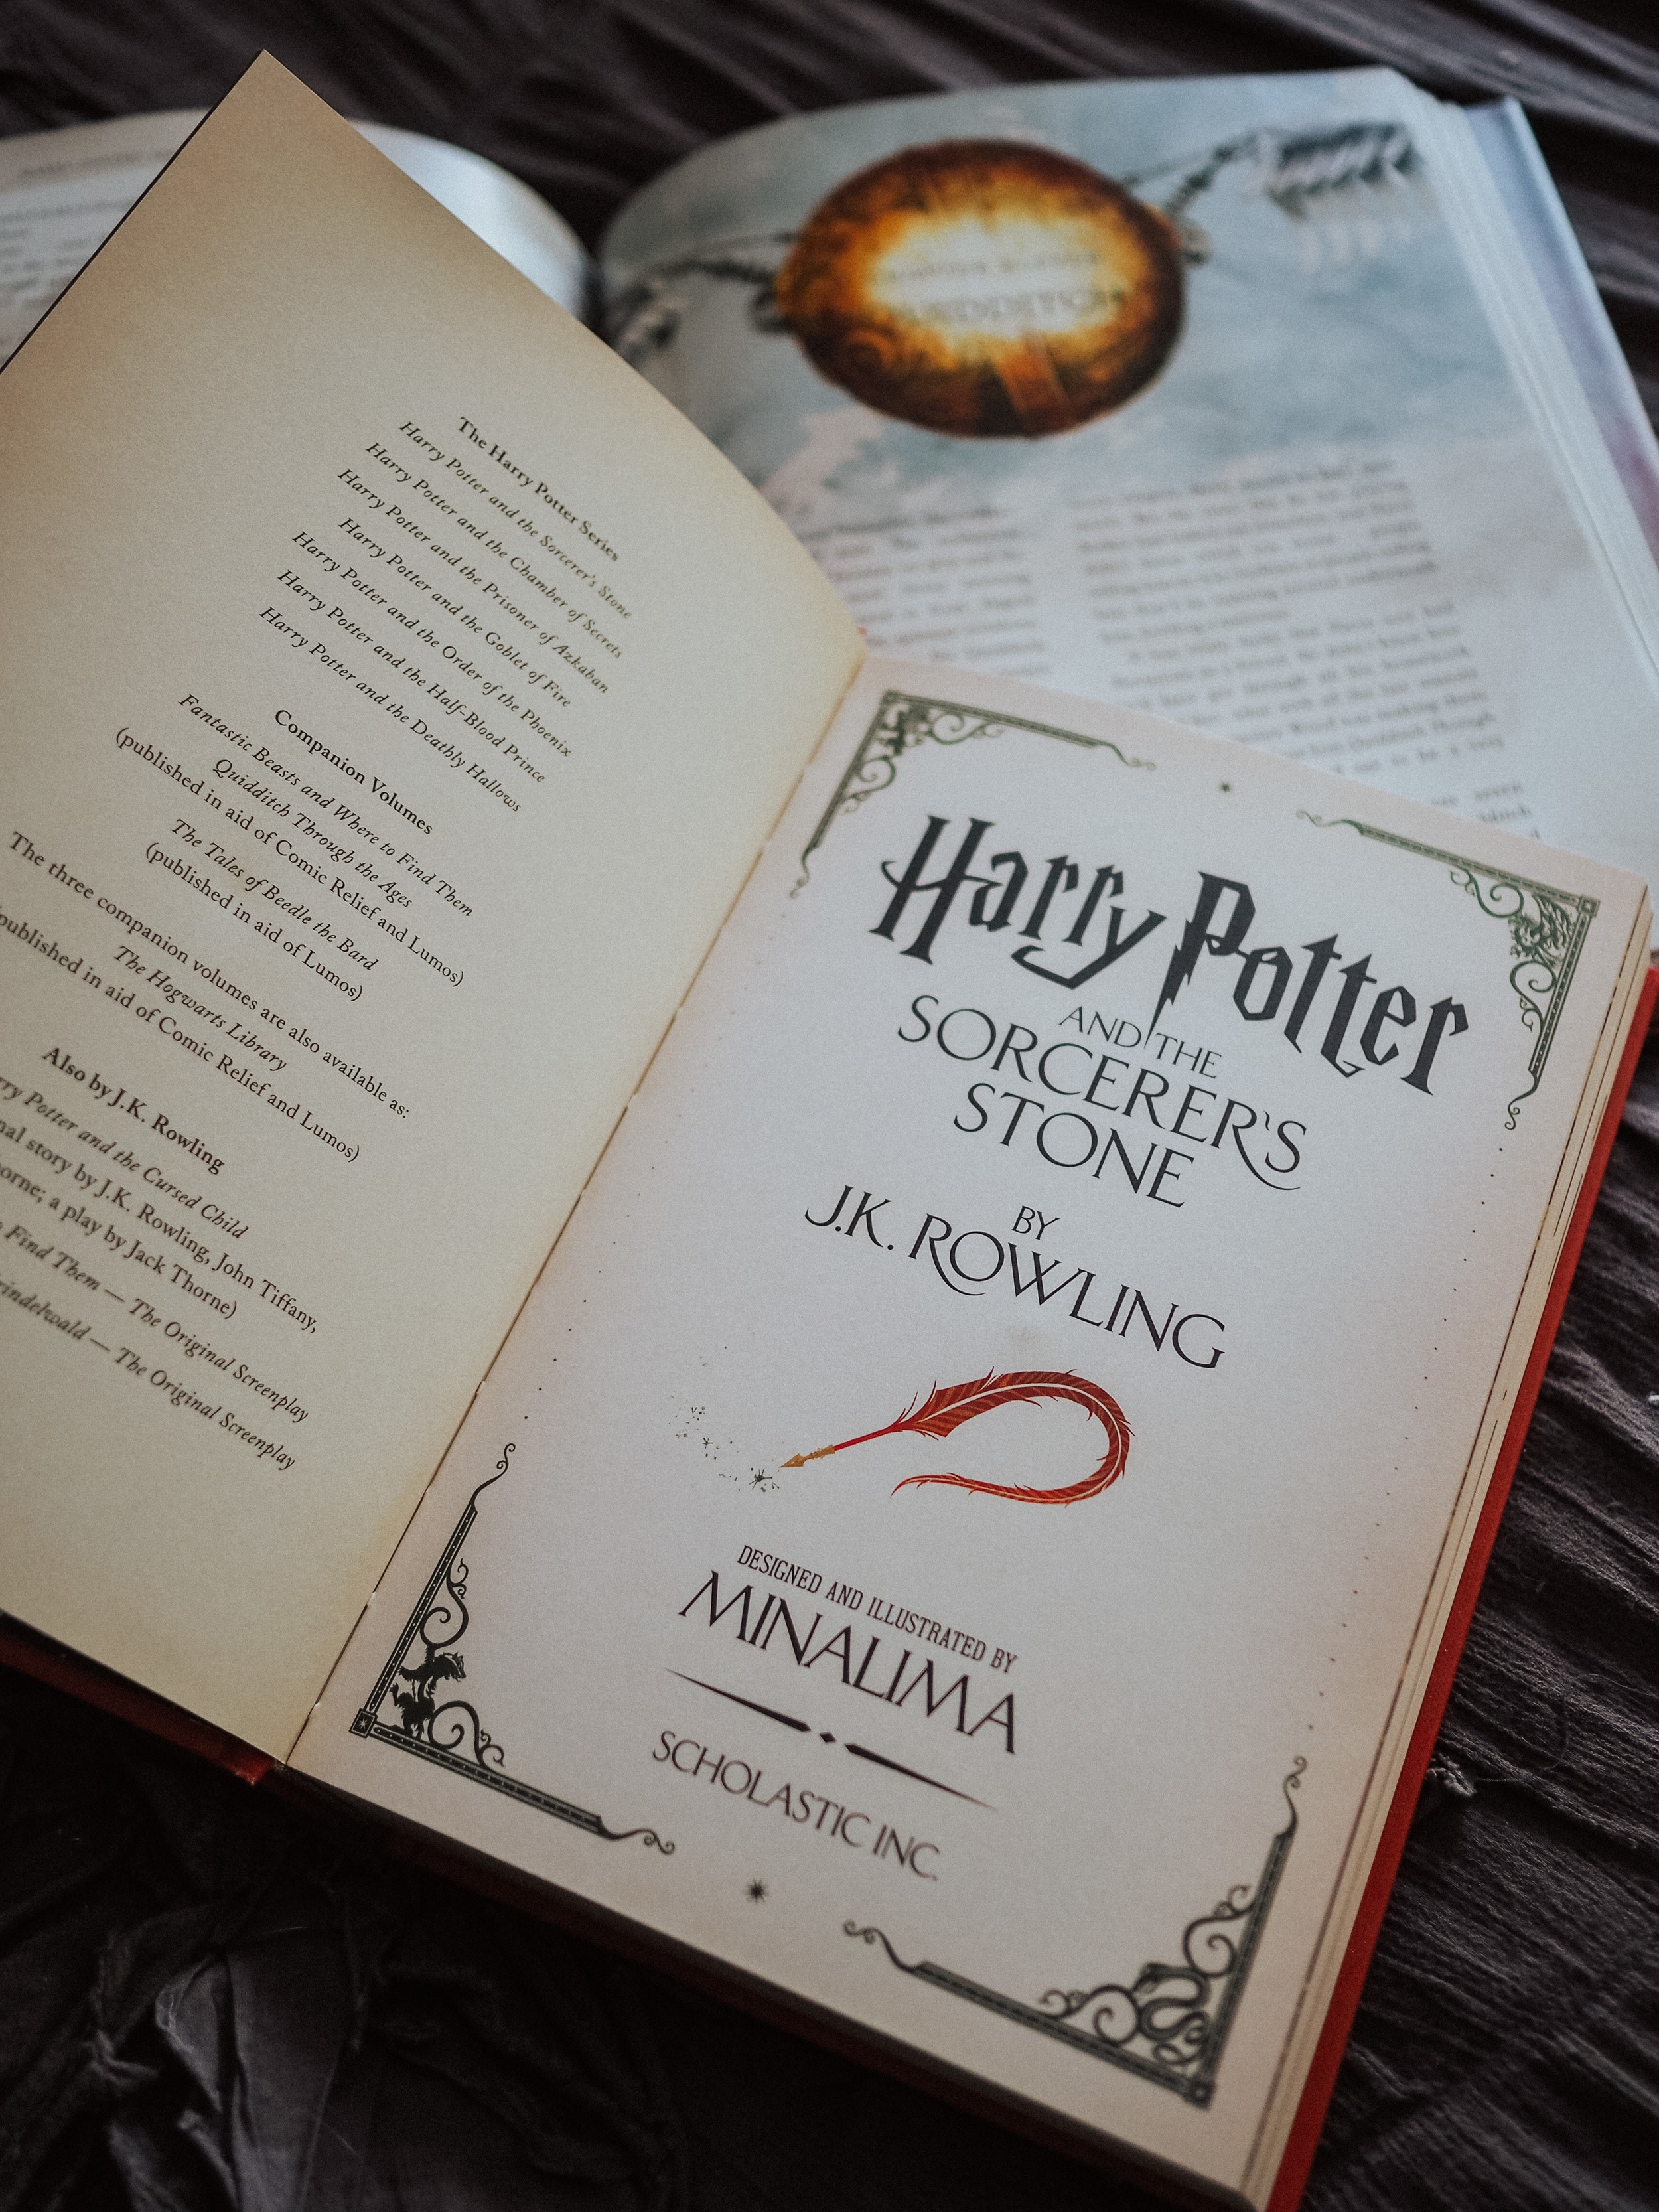 Kelsey from Blondes and Bagels reviews the best Harry Potter illustrated books for yourself - or as gifts for your Potter loving friends!